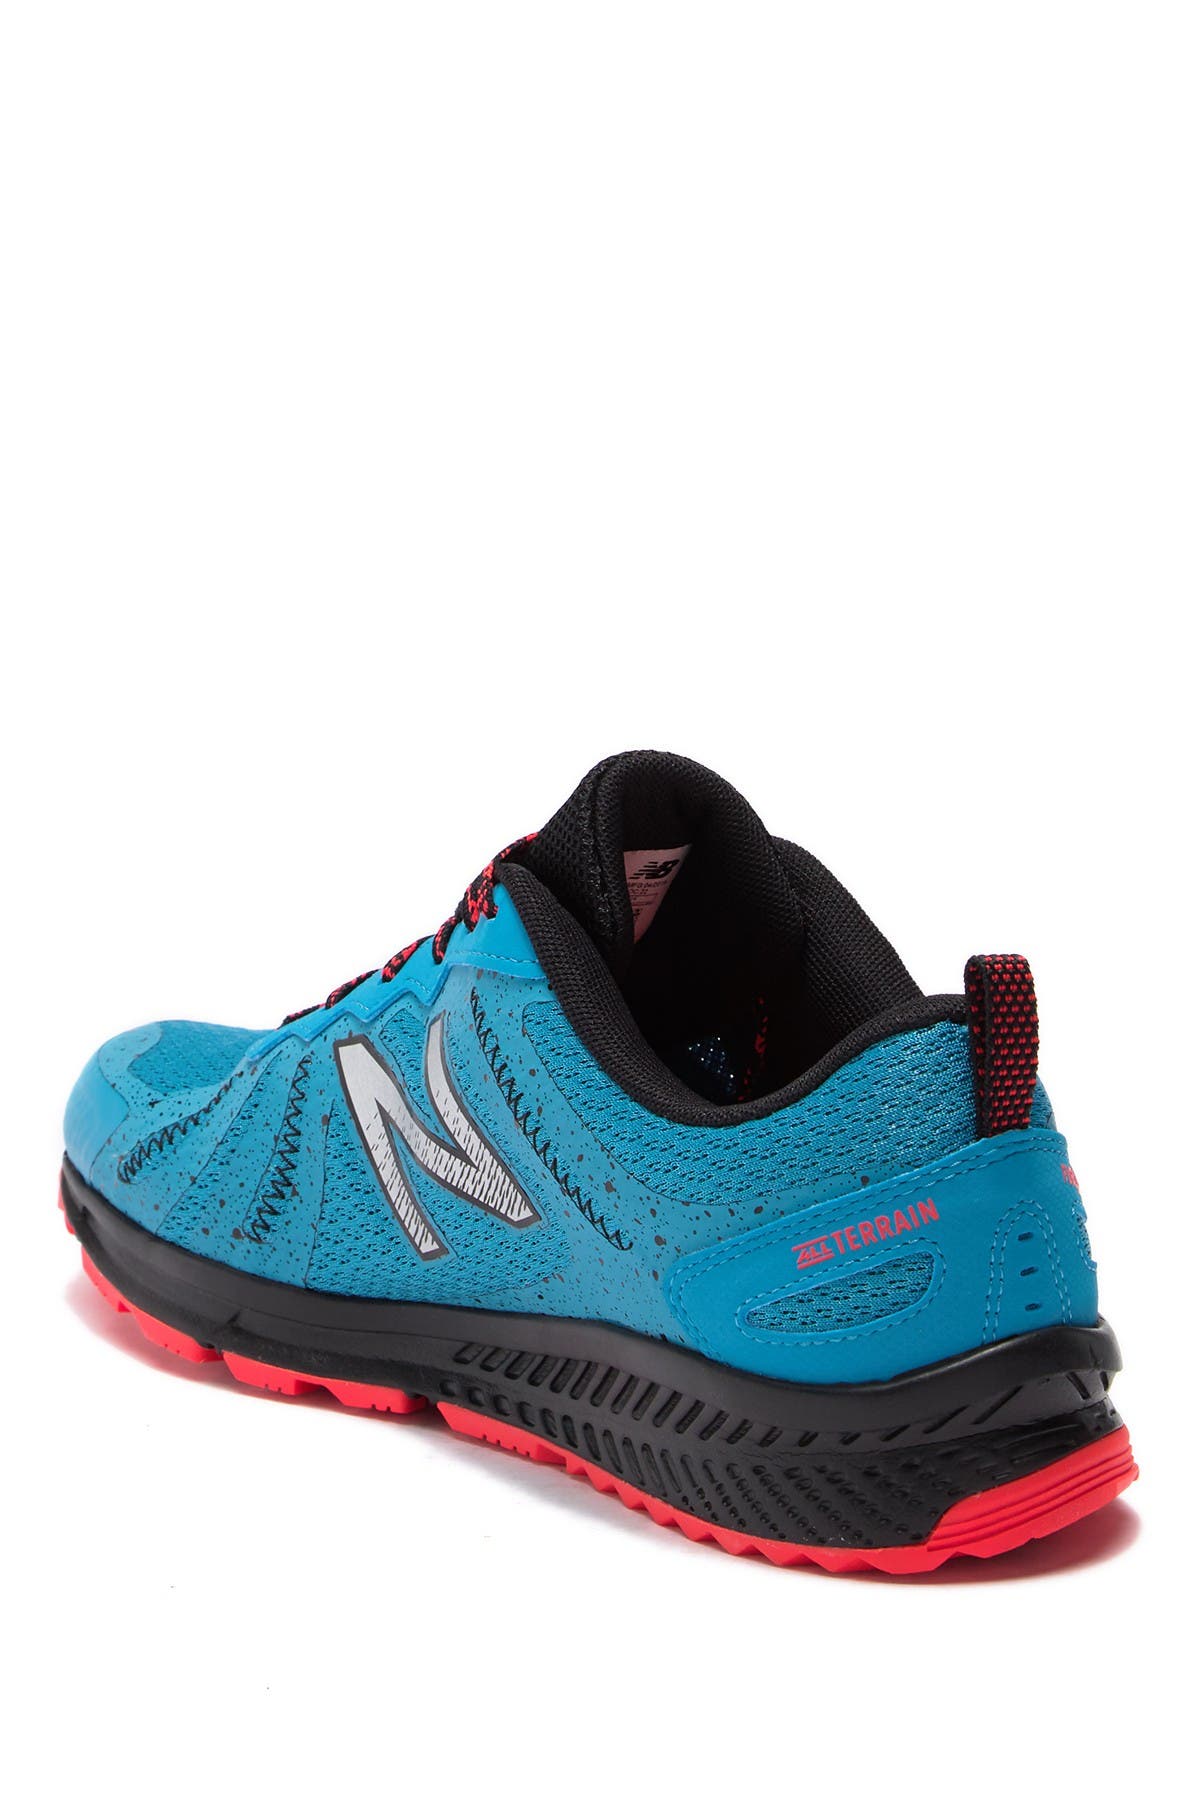 new balance fuelcore t590v4 review